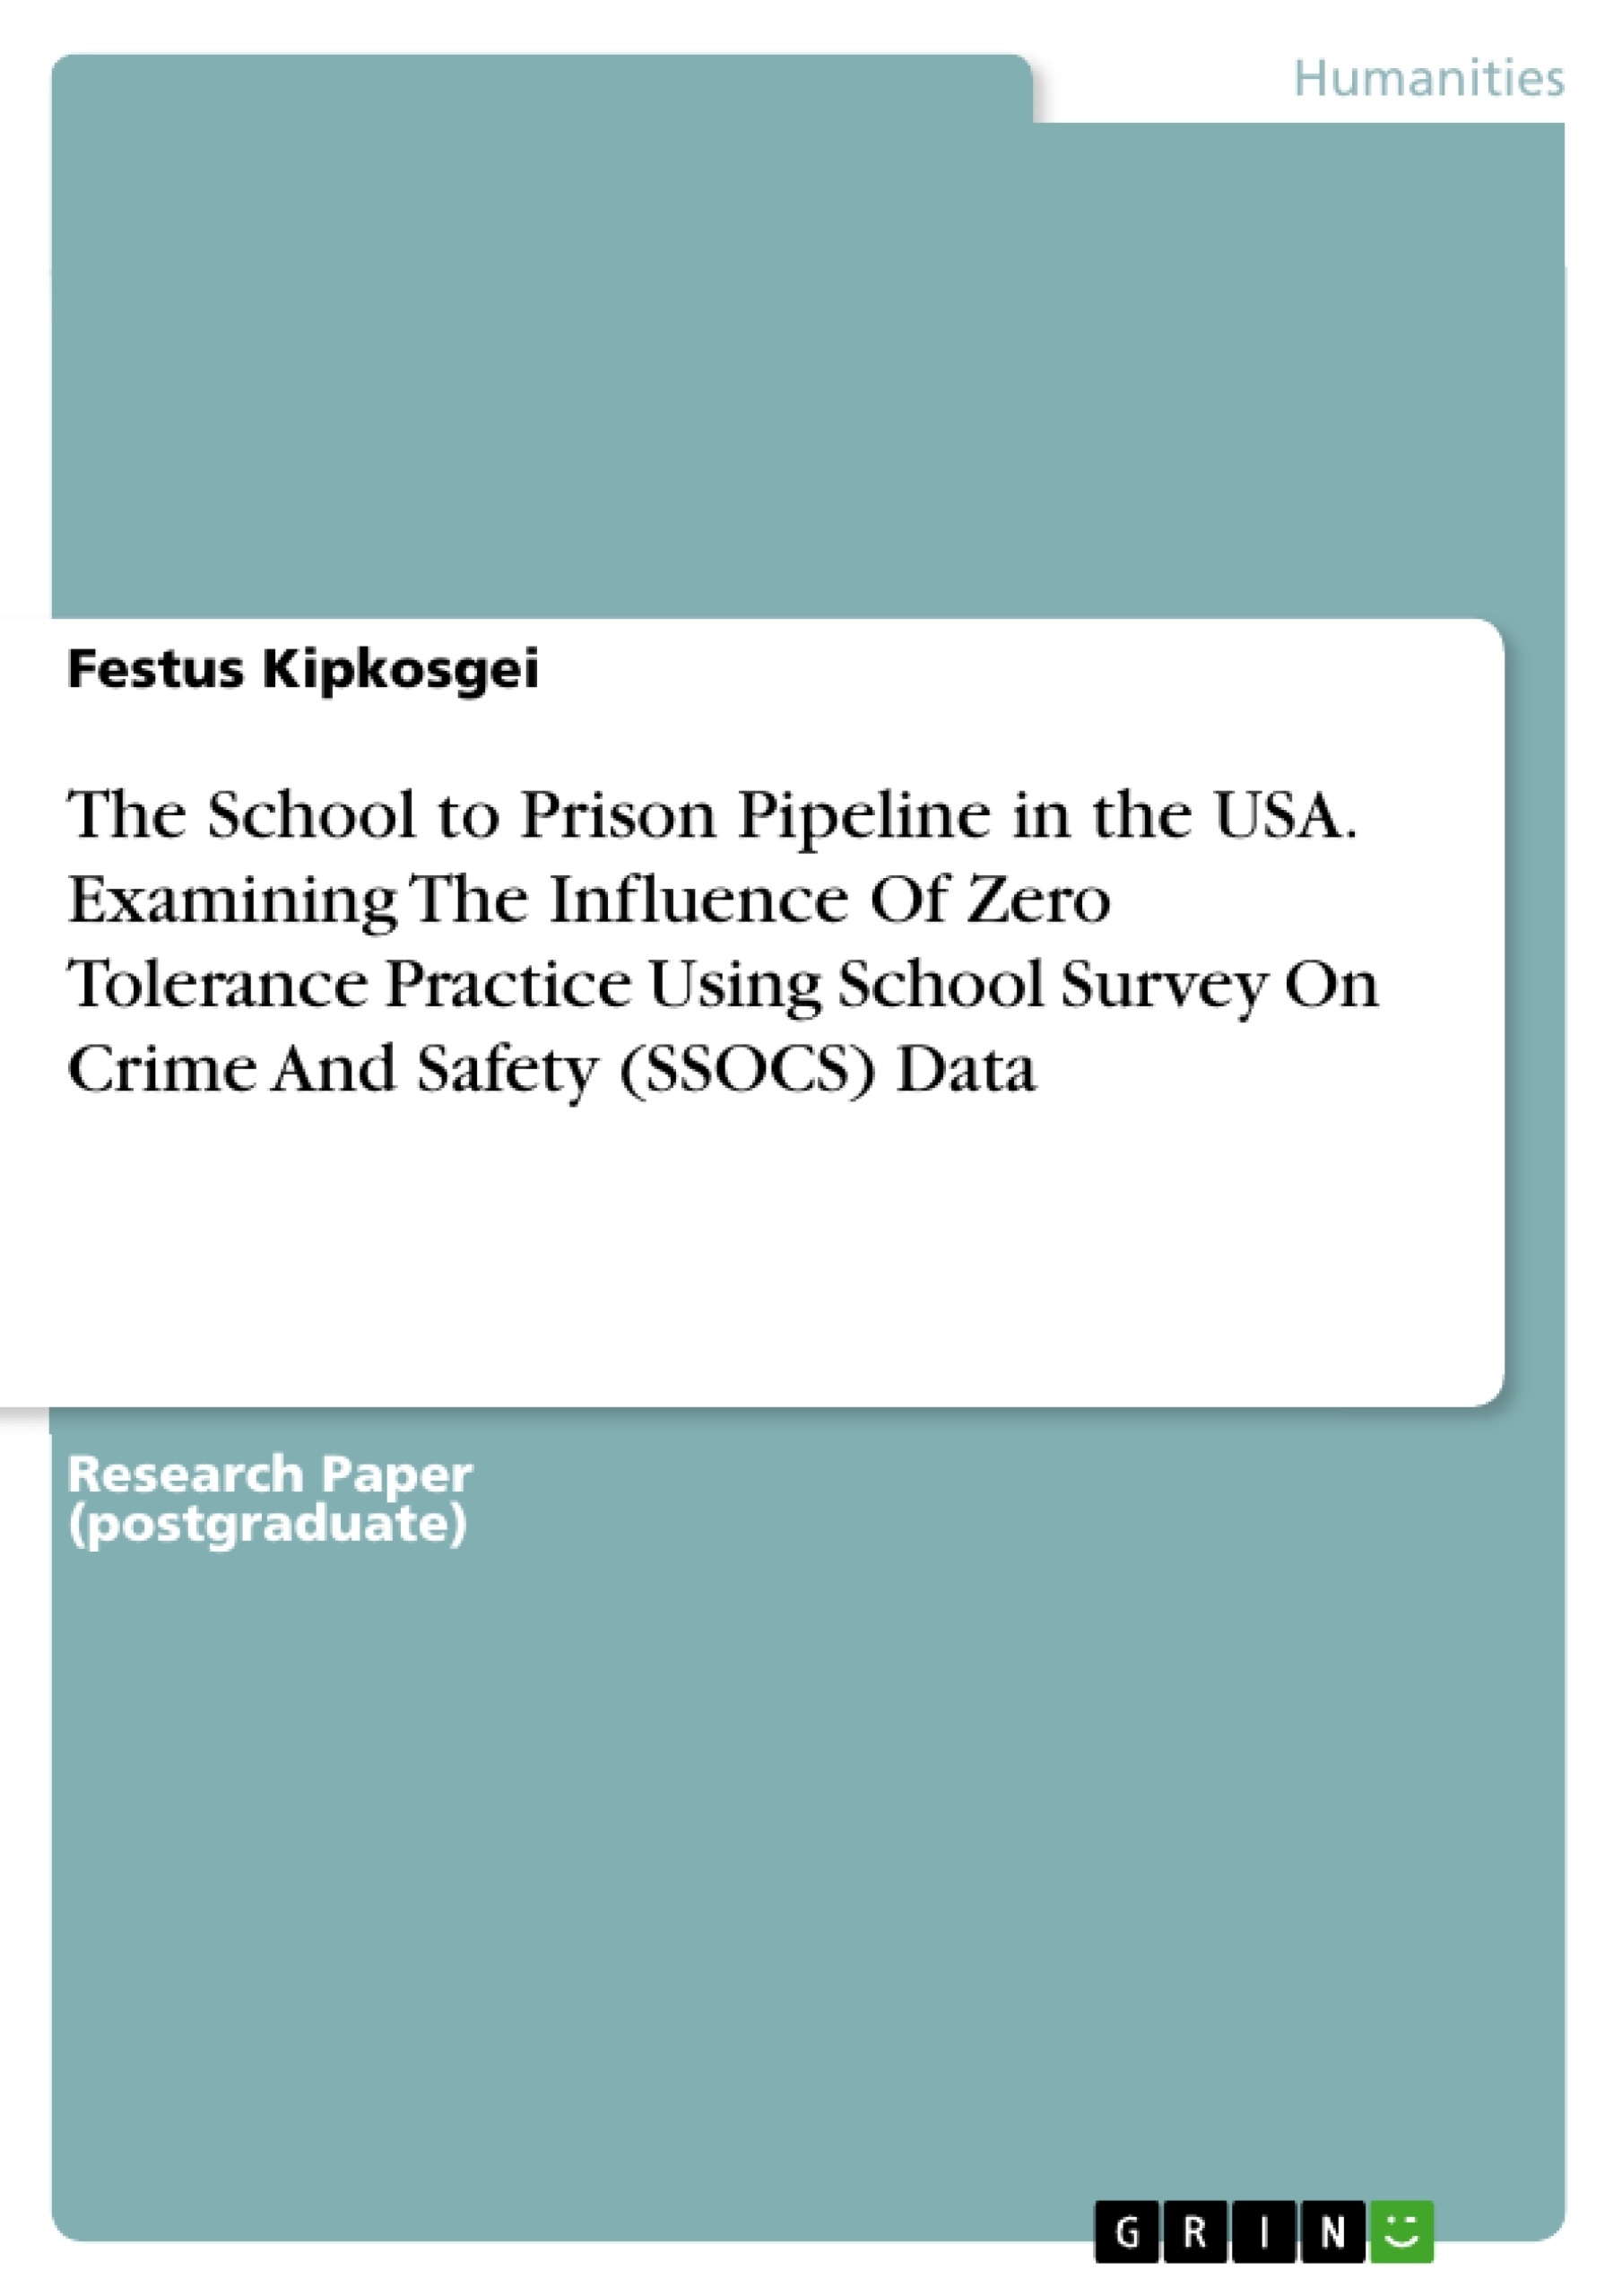 Titre: The School to Prison Pipeline in the USA. Examining The Influence Of Zero Tolerance Practice Using School Survey On Crime And Safety (SSOCS) Data